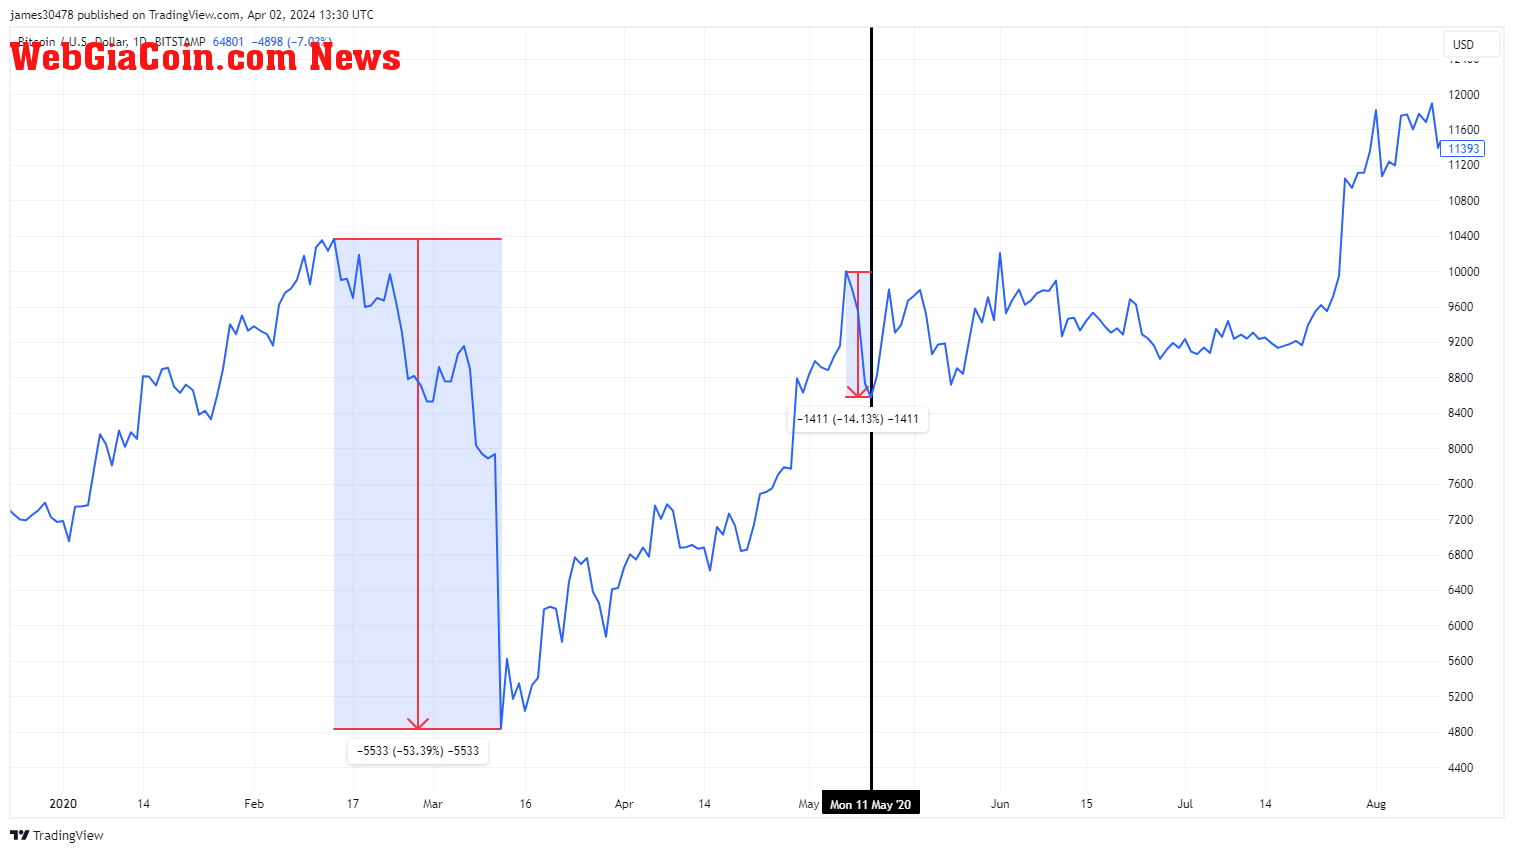 BTCUSD: 2020 Halving: (Source: Trading View)